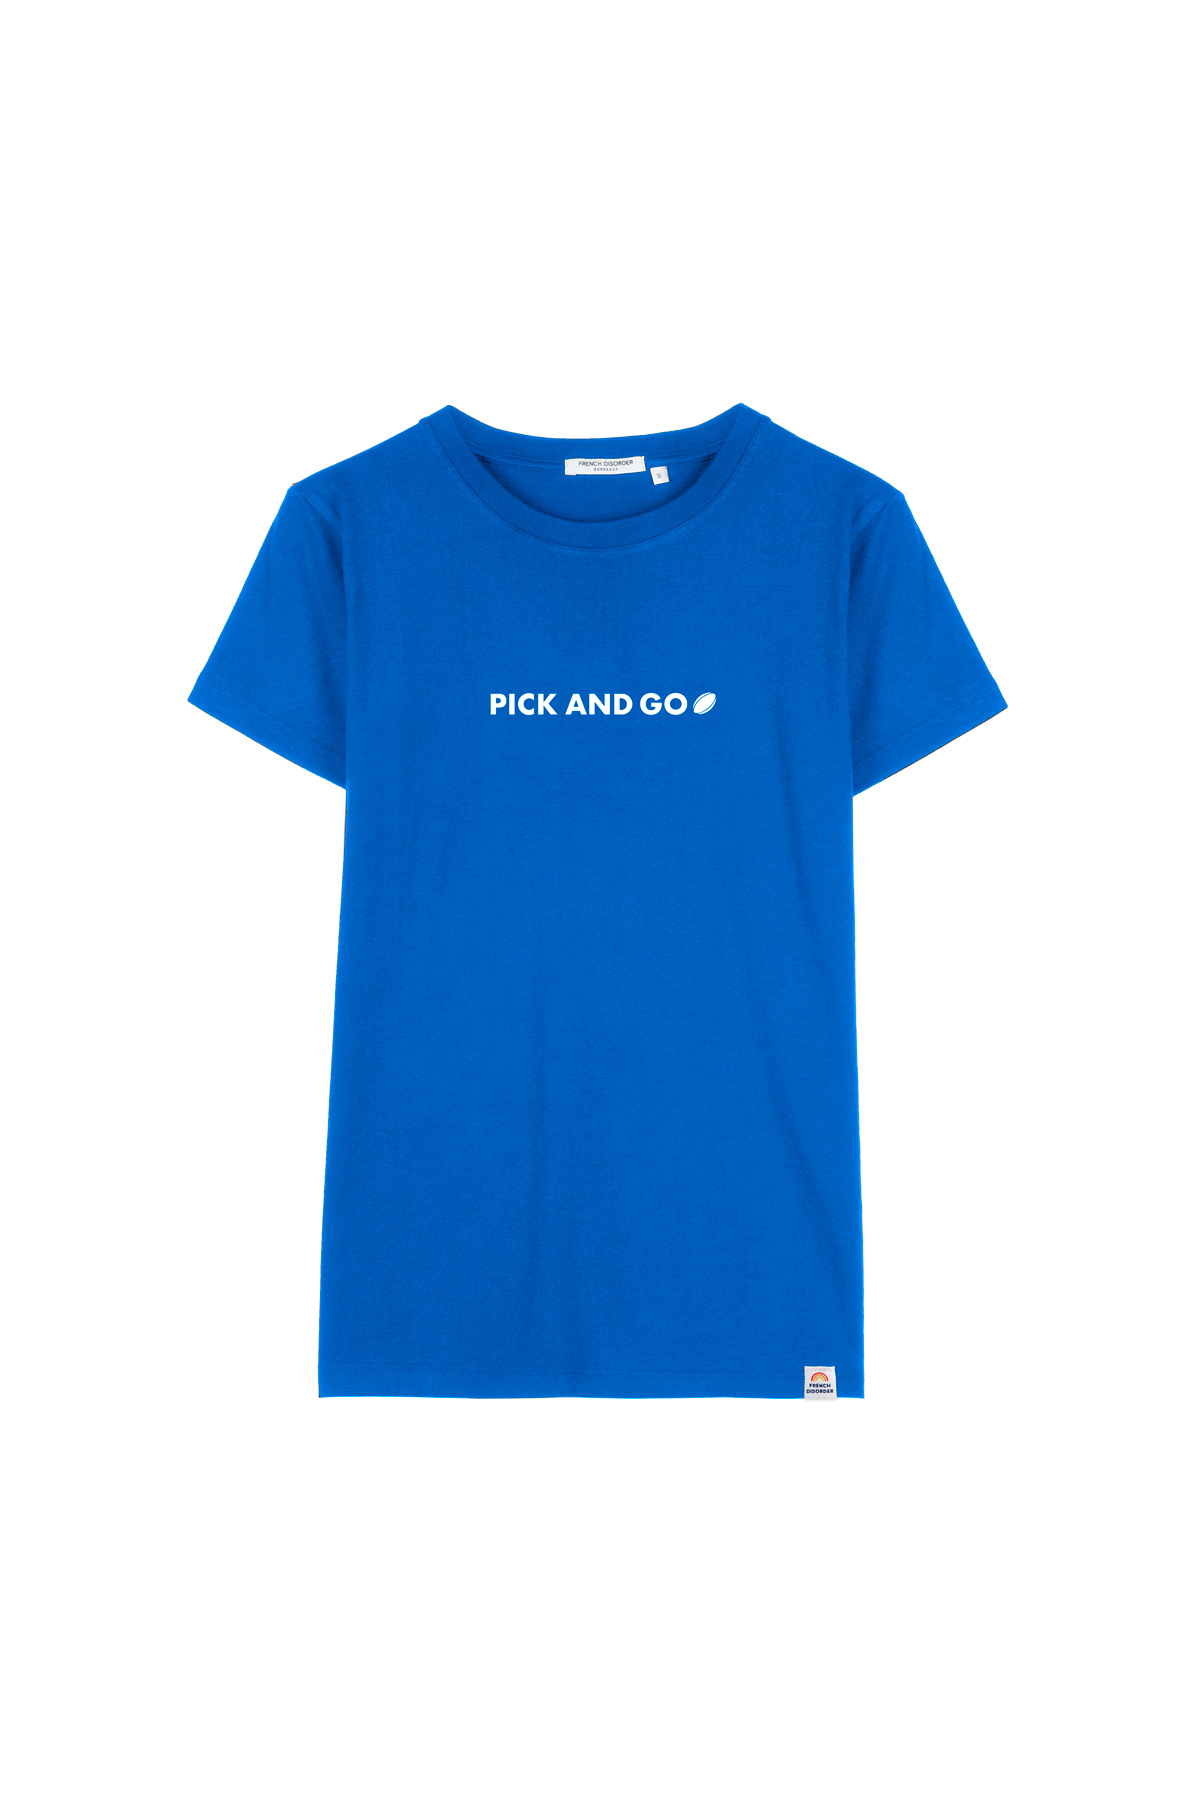 Tshirt Alex PICK AND GO (Rugby) (M)